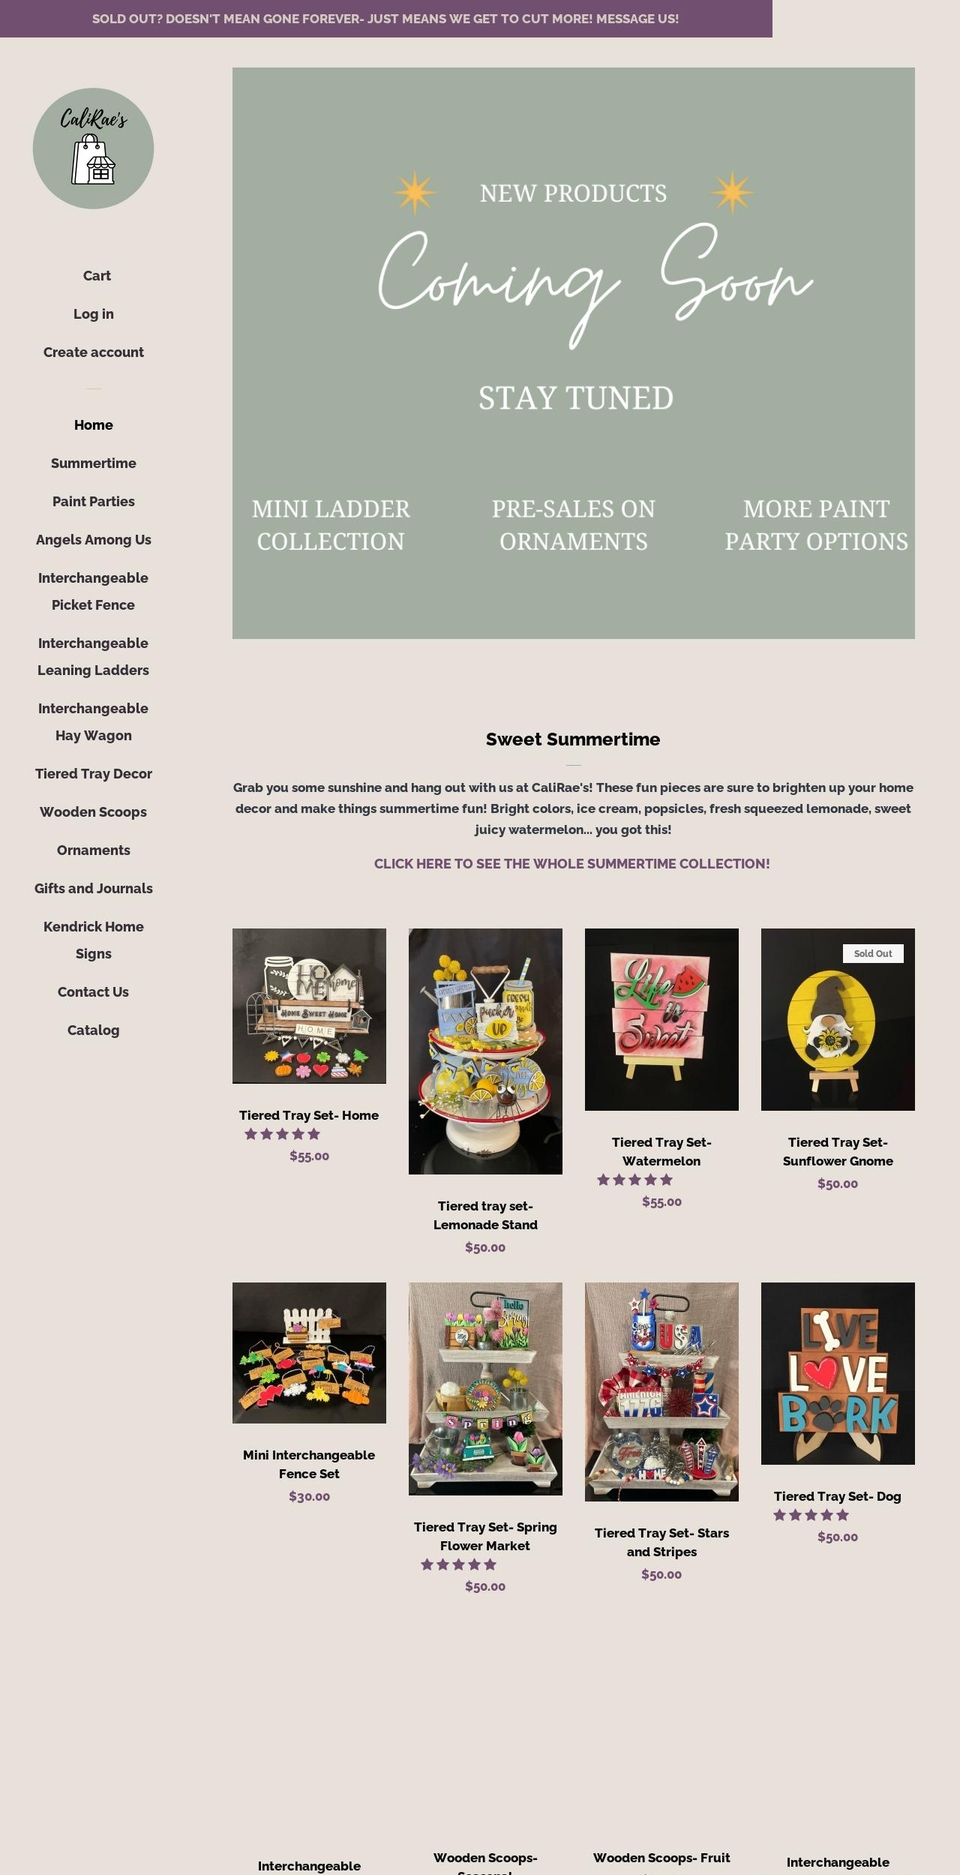 Pop with Installments message Shopify theme site example caliraes.com